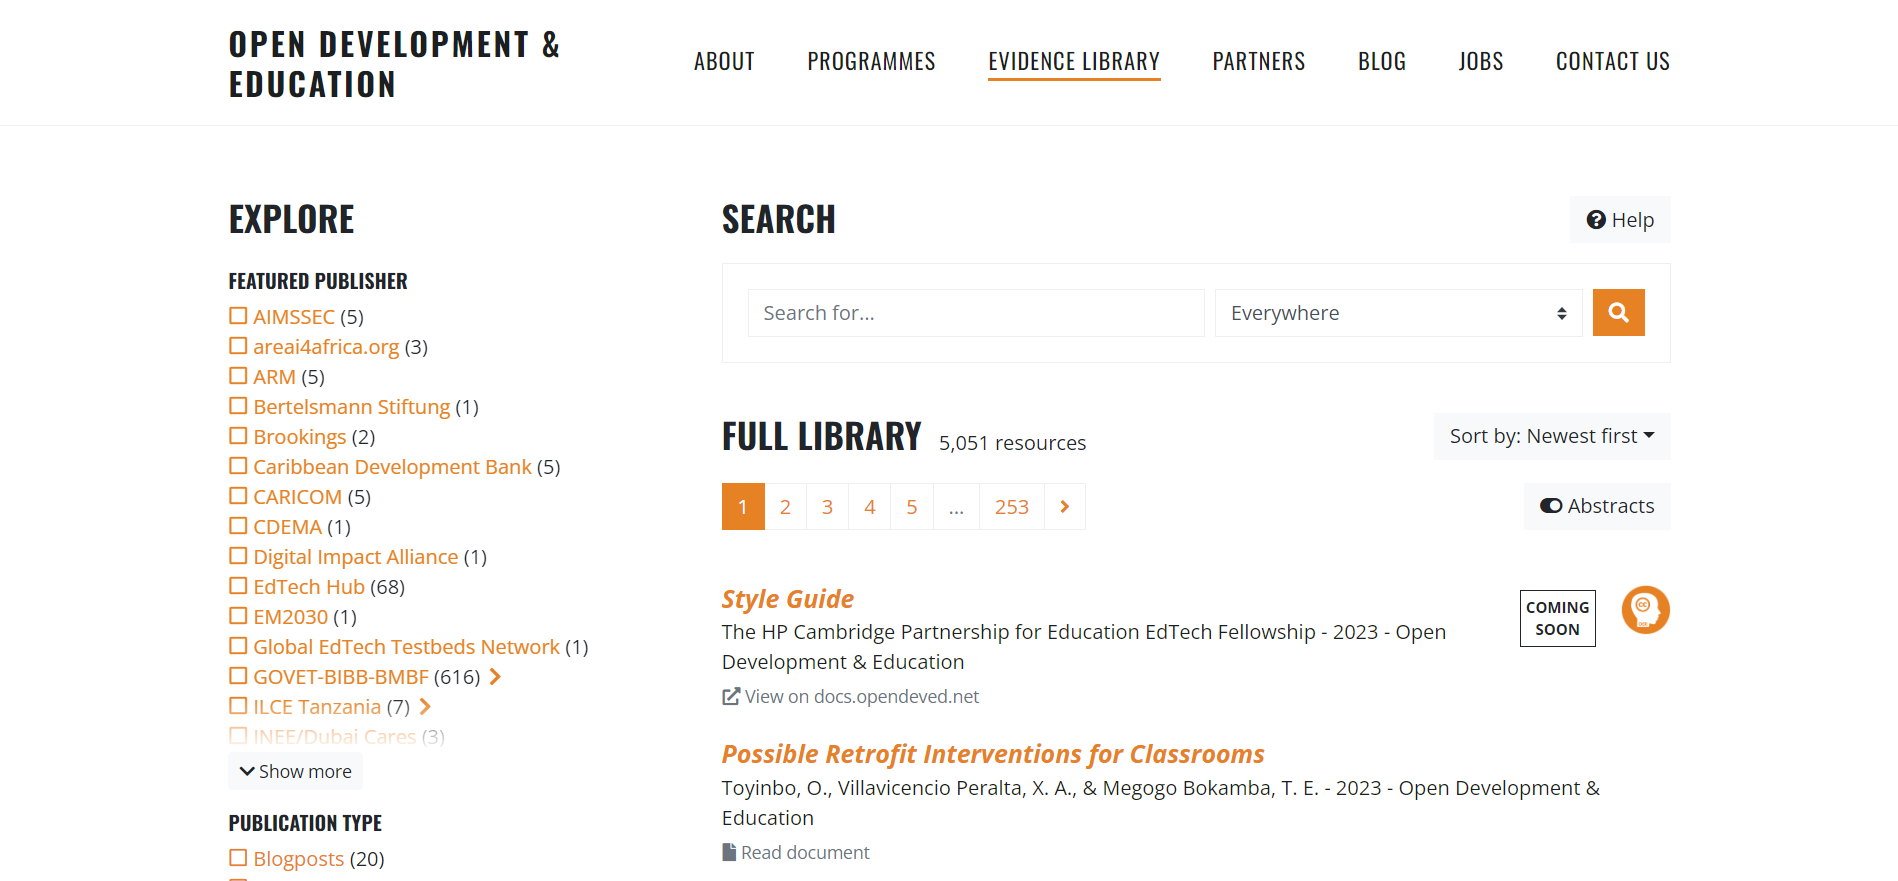 Evidence library of Open Development & Education